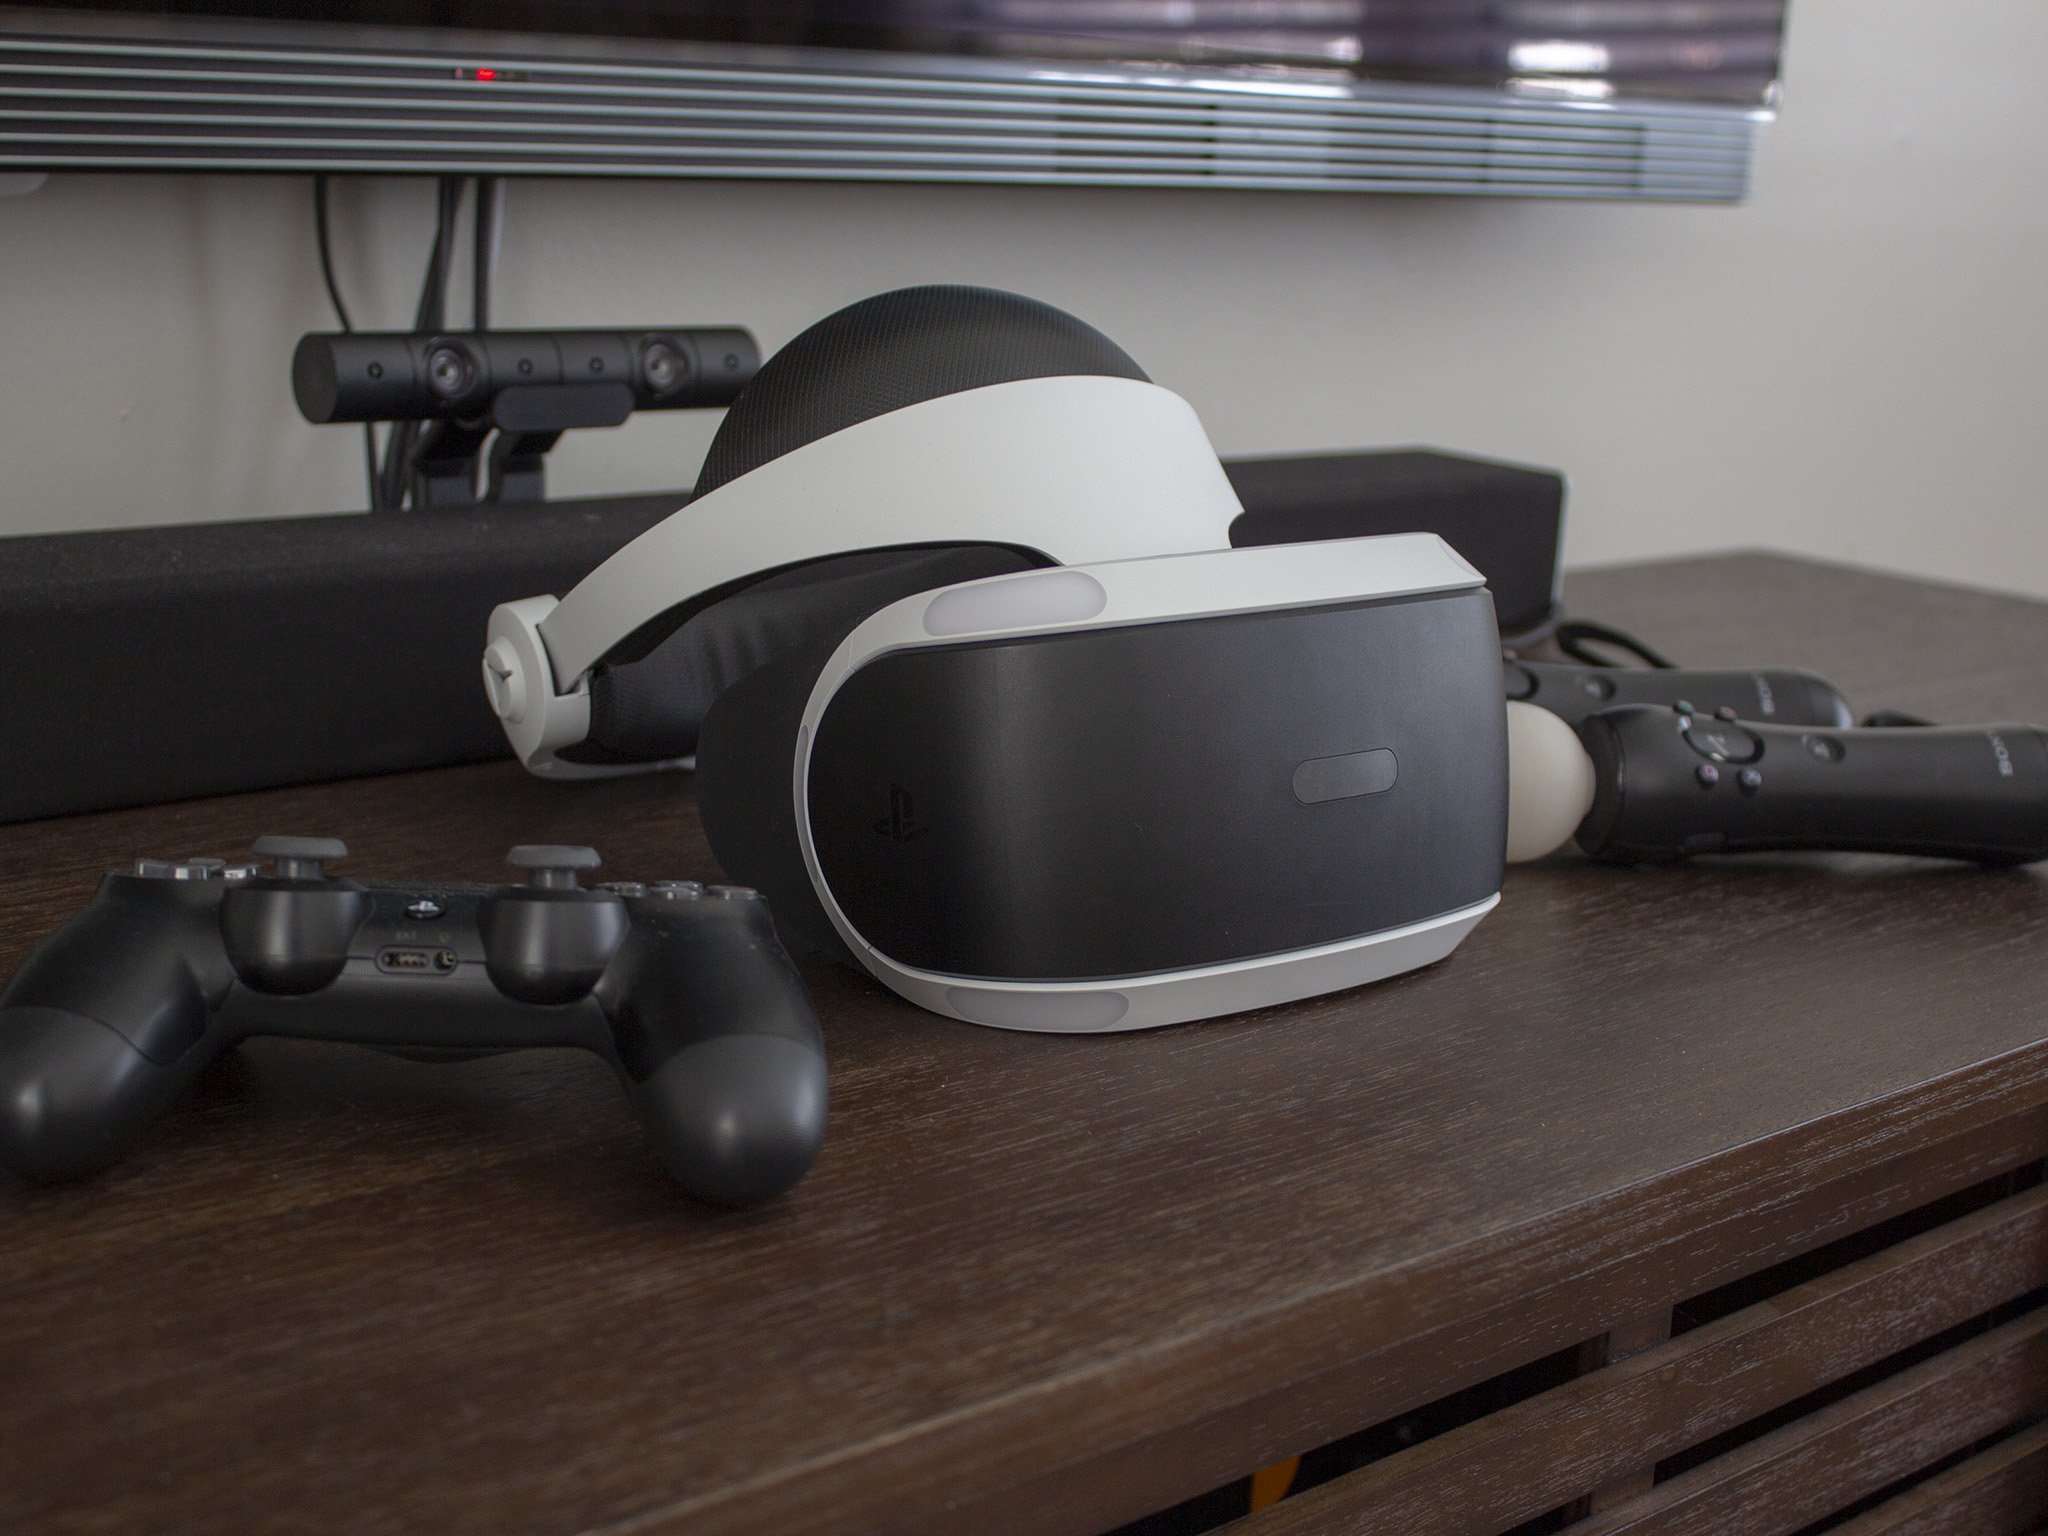 5 Years of PlayStation VR in Australia with 3 FREE Games 2023